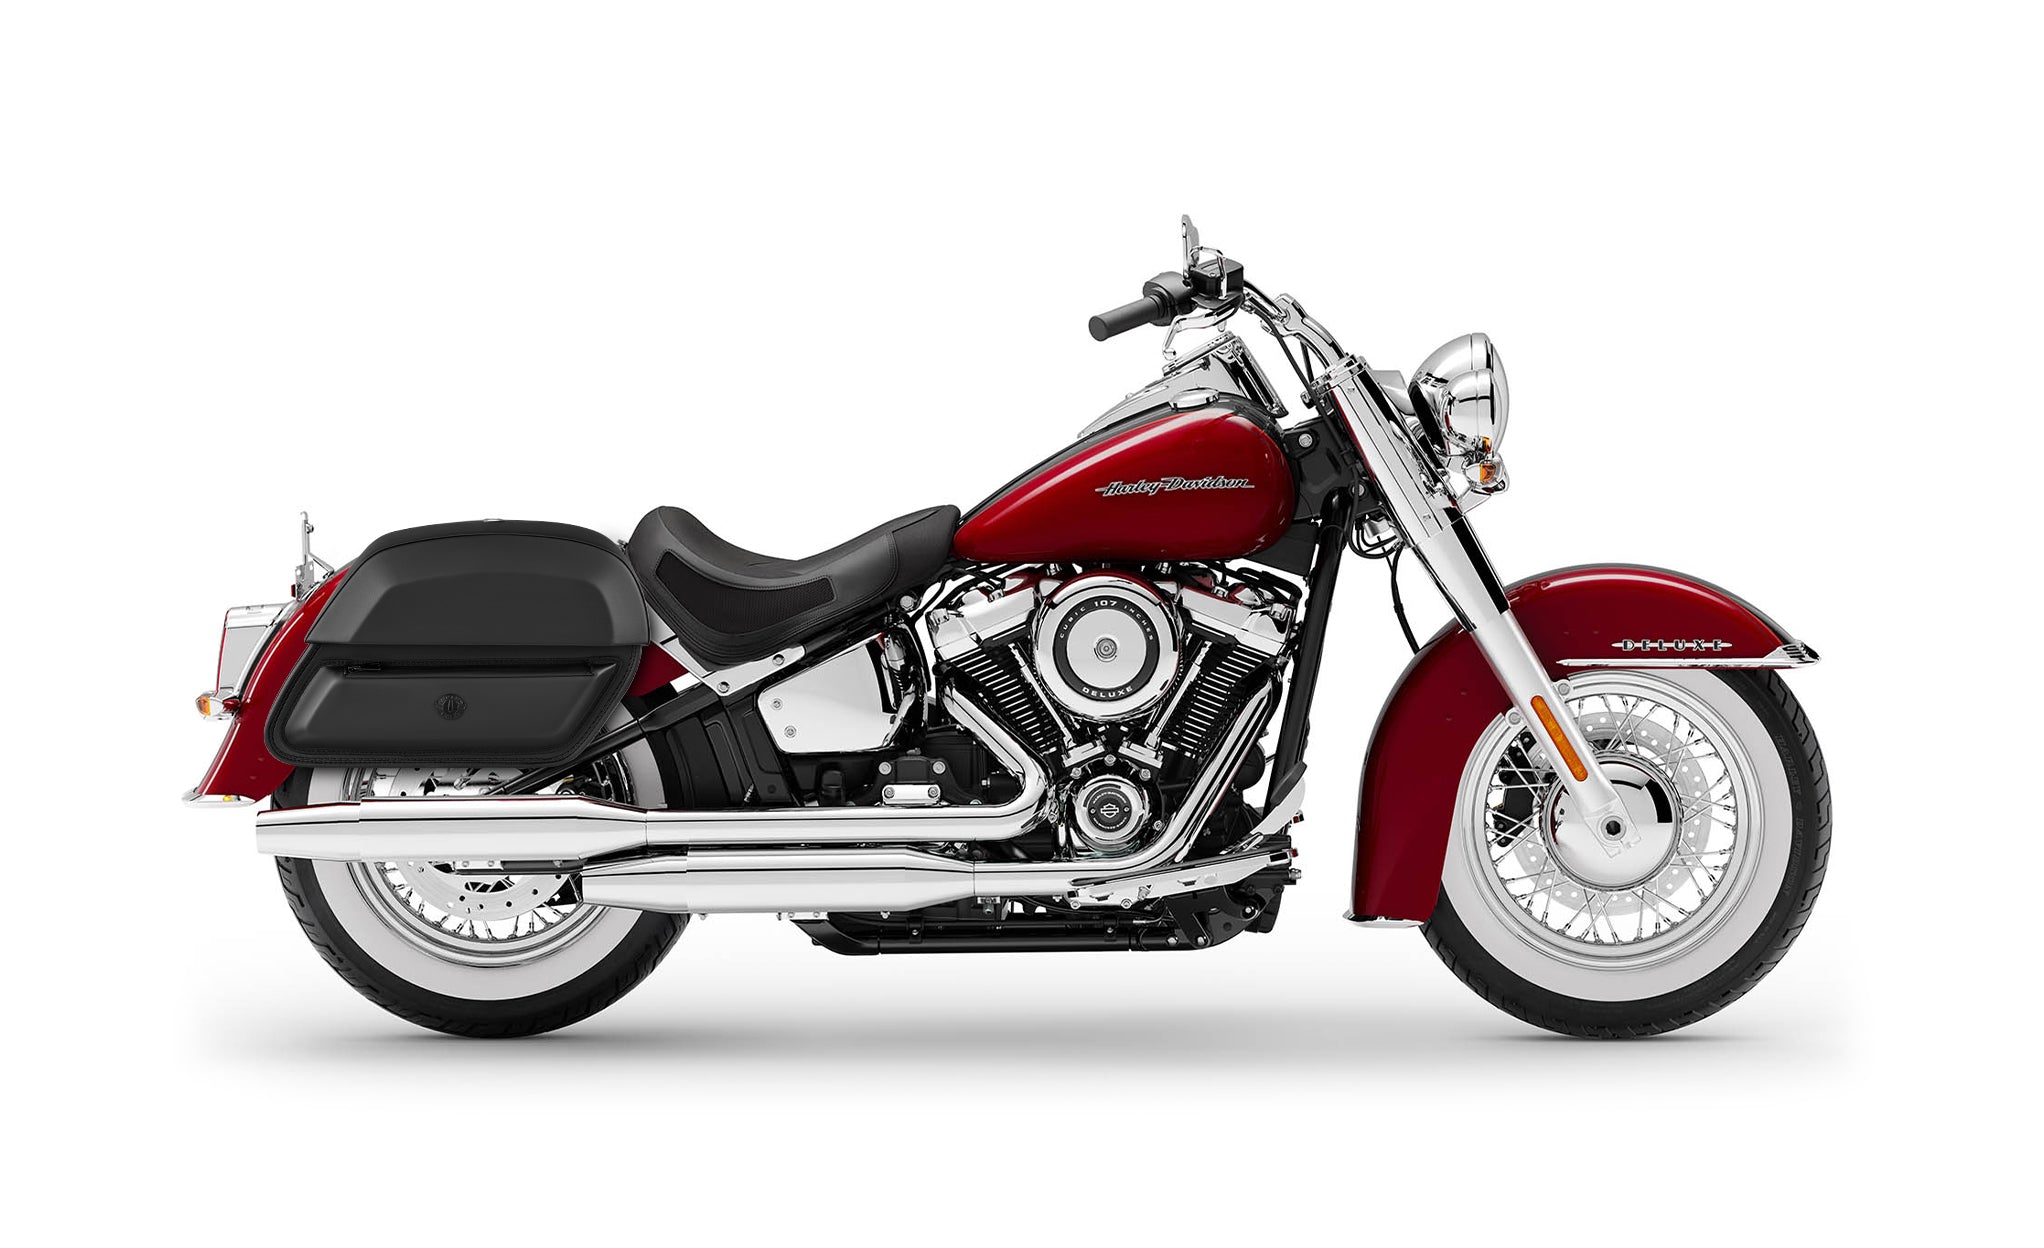 28L - Wraith Medium Saddlebags for Harley Softail Deluxe FLDE BAG on Bike View @expand